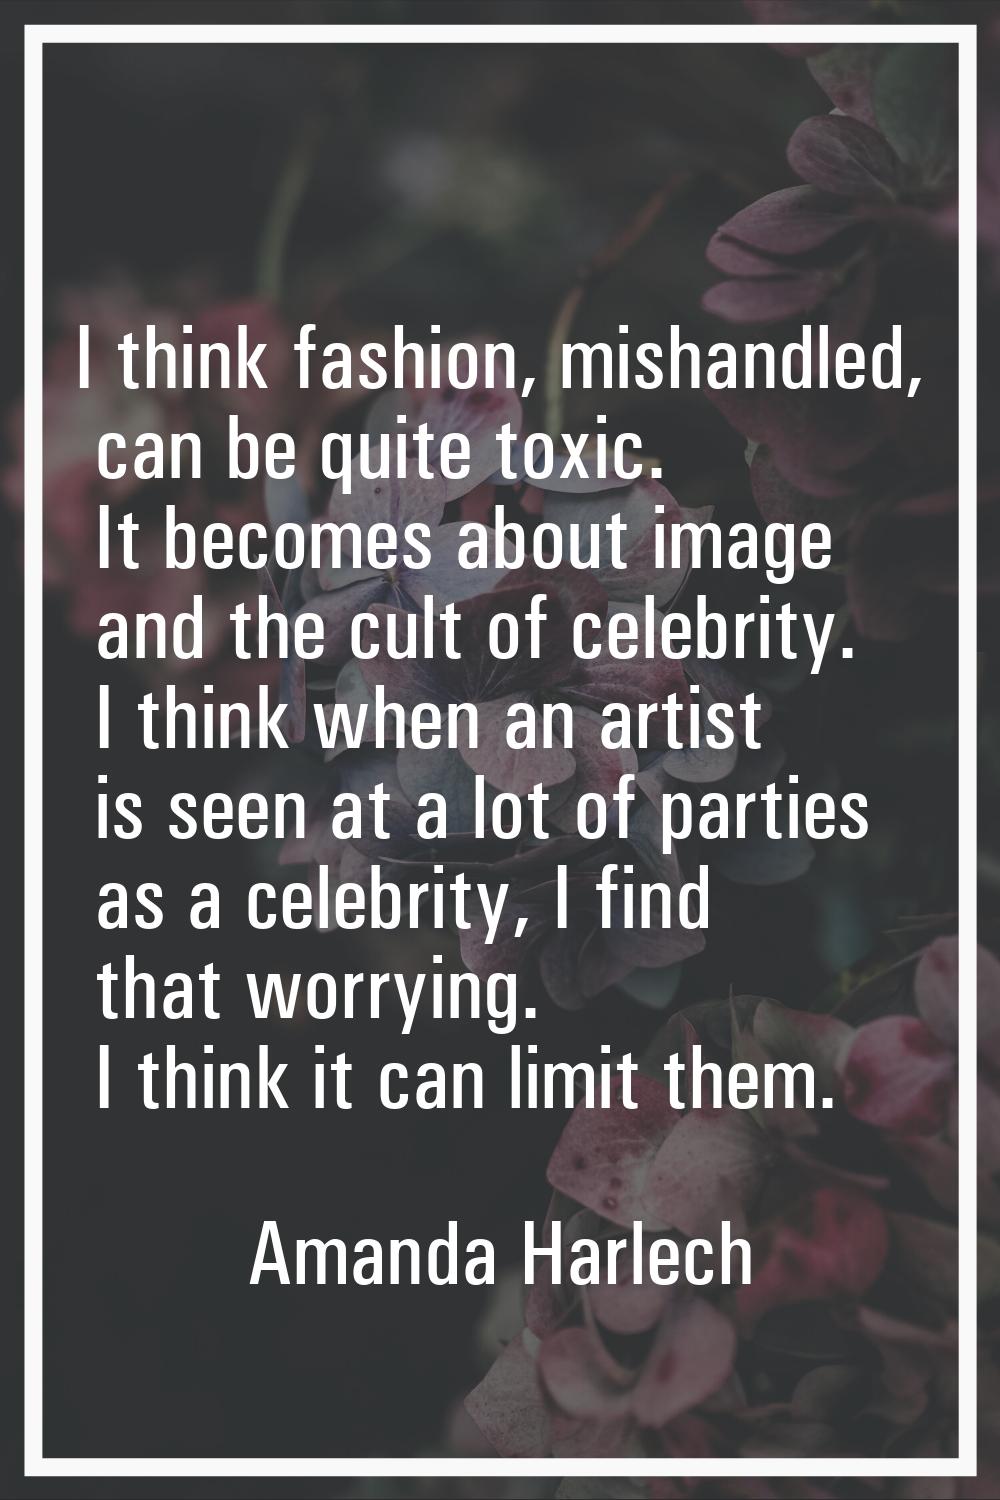 I think fashion, mishandled, can be quite toxic. It becomes about image and the cult of celebrity. 